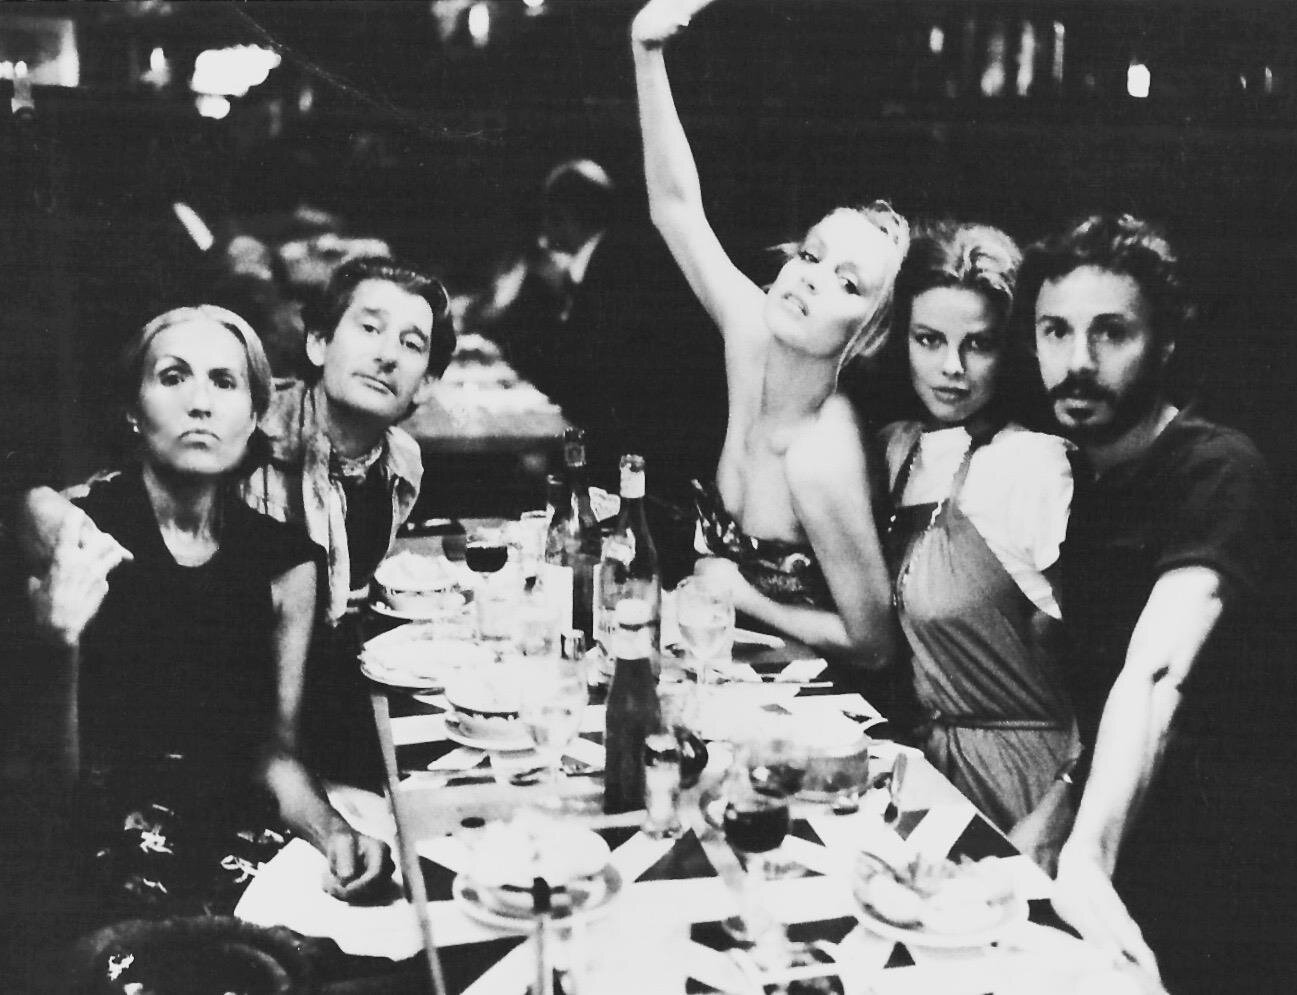 "Dinner at Joe's Stone Crab / while shooting "Florida Sun Times" for American Vogue 1974 with left to right Polly Mellen, Helmut Newton, Jerry Hall, Lisa Taylor &amp; Rick Gillette"